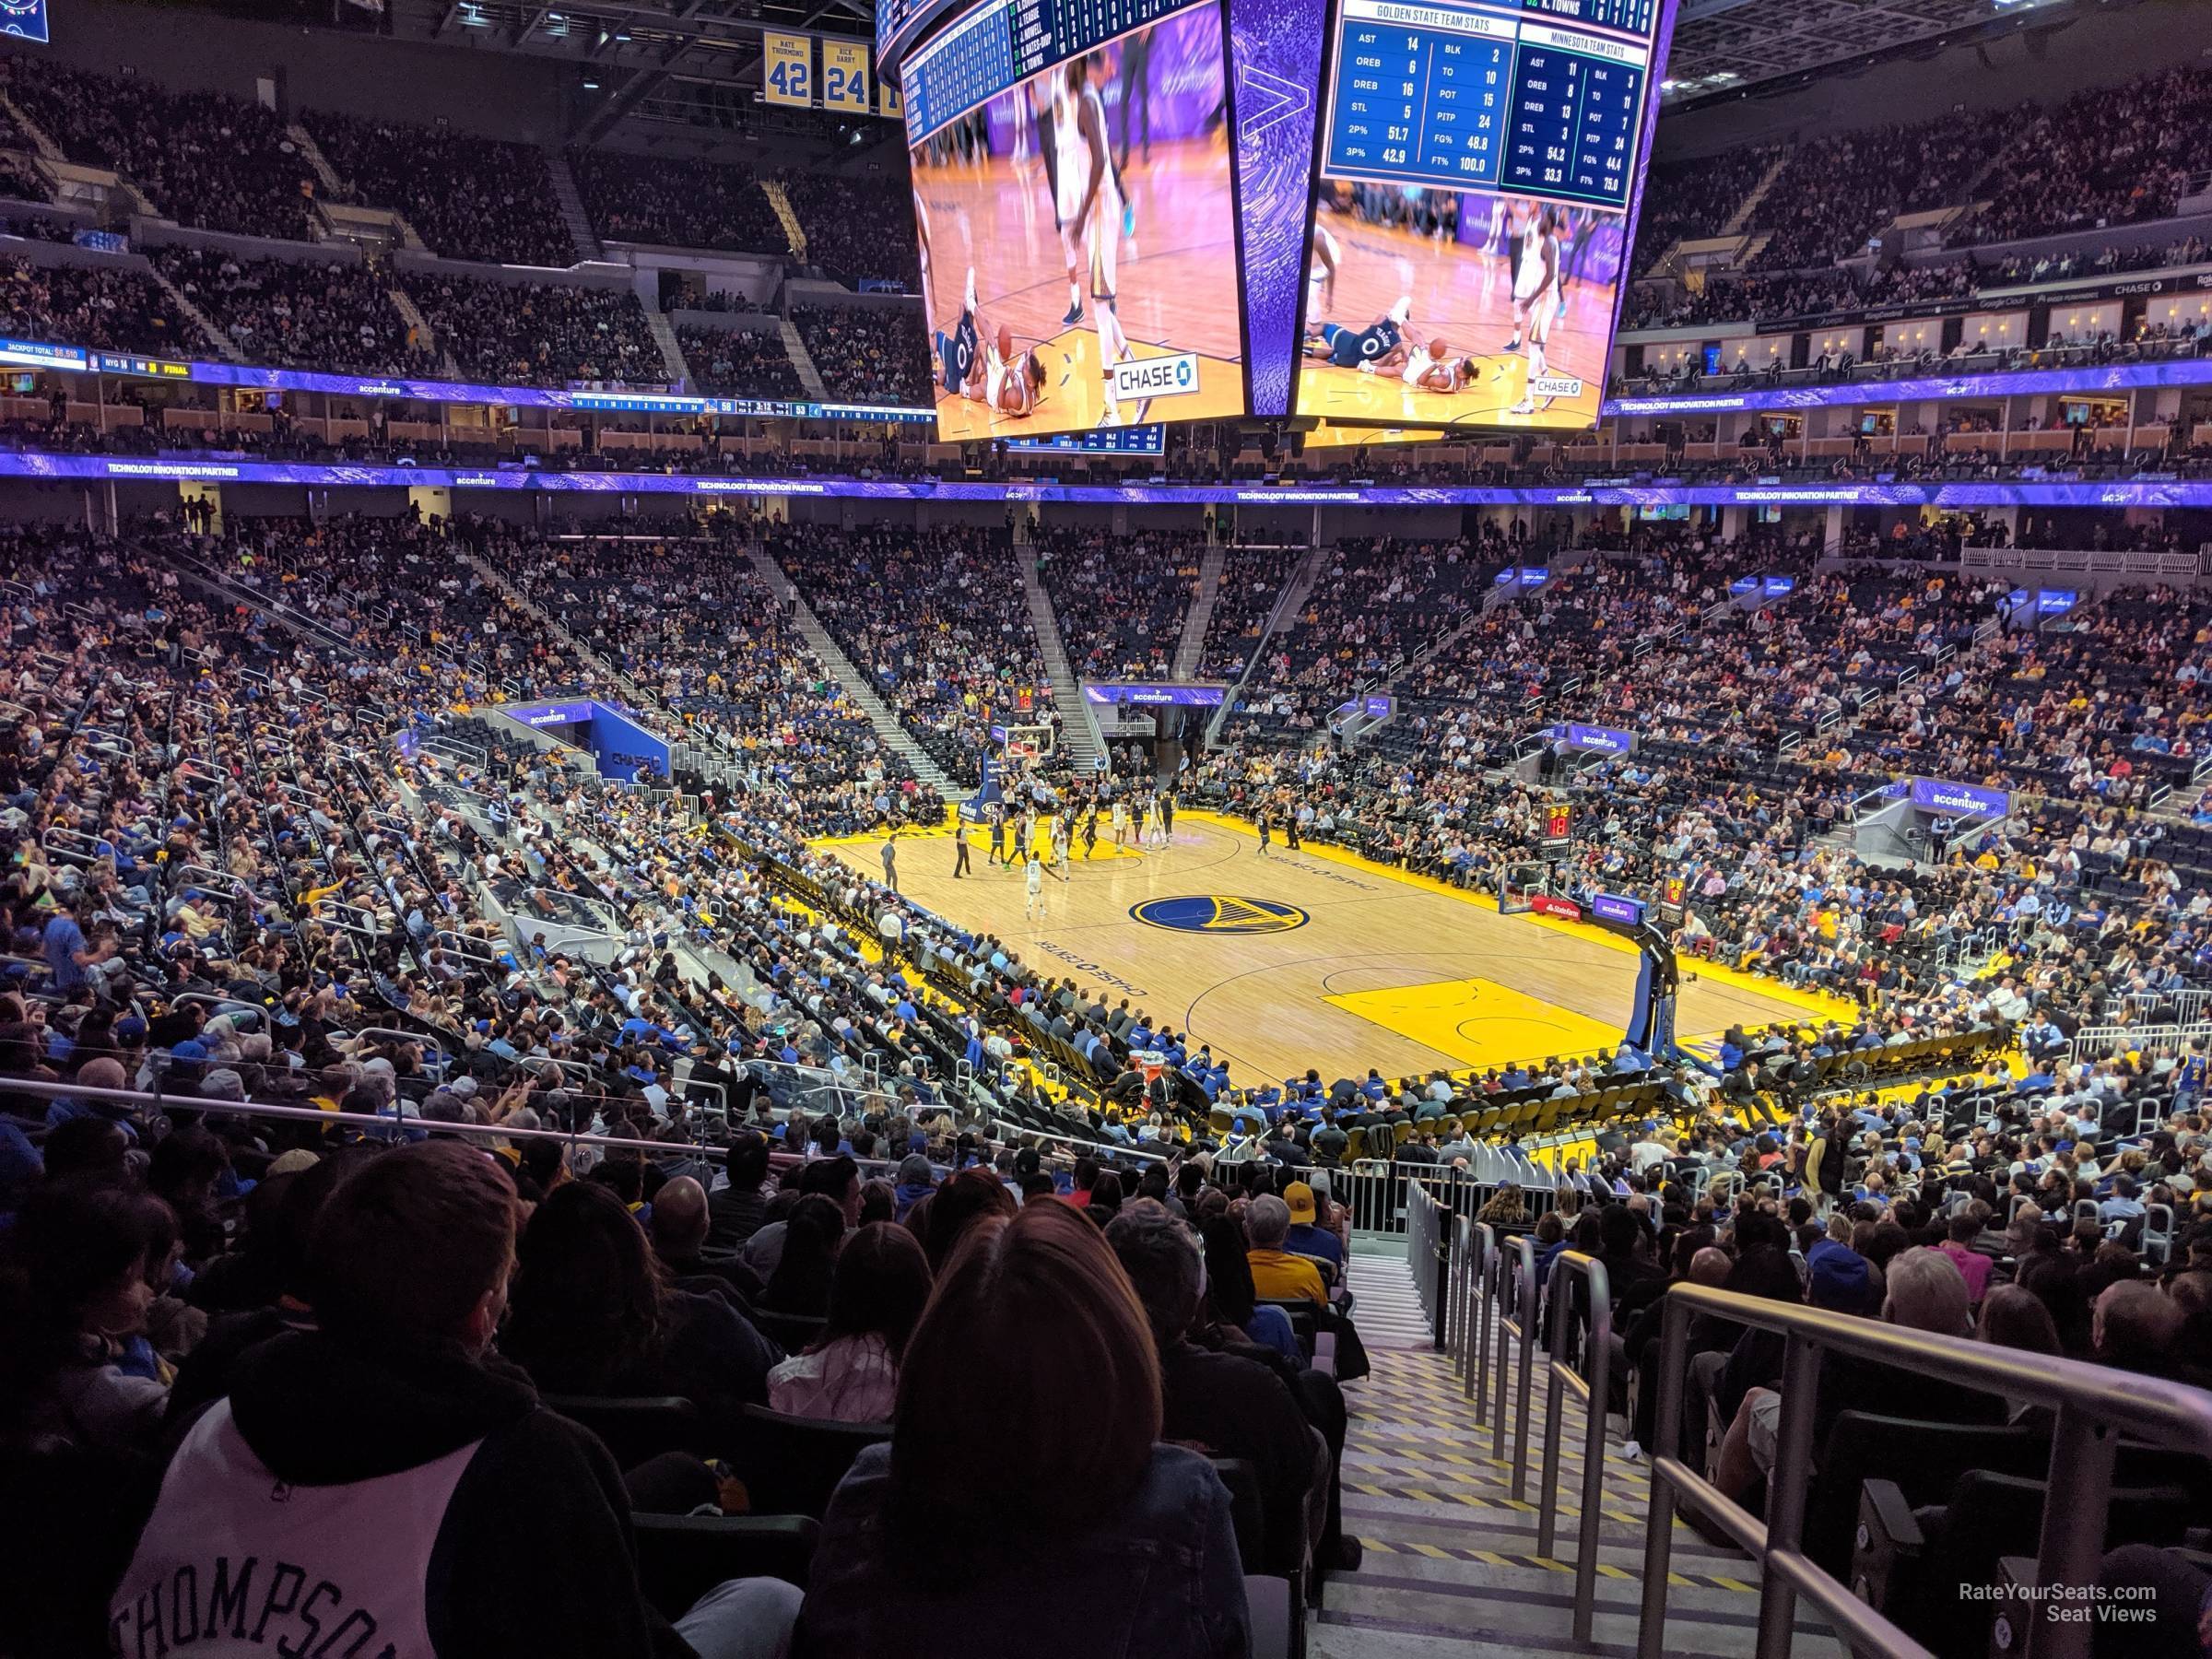 section 124, row 27 seat view  for basketball - chase center